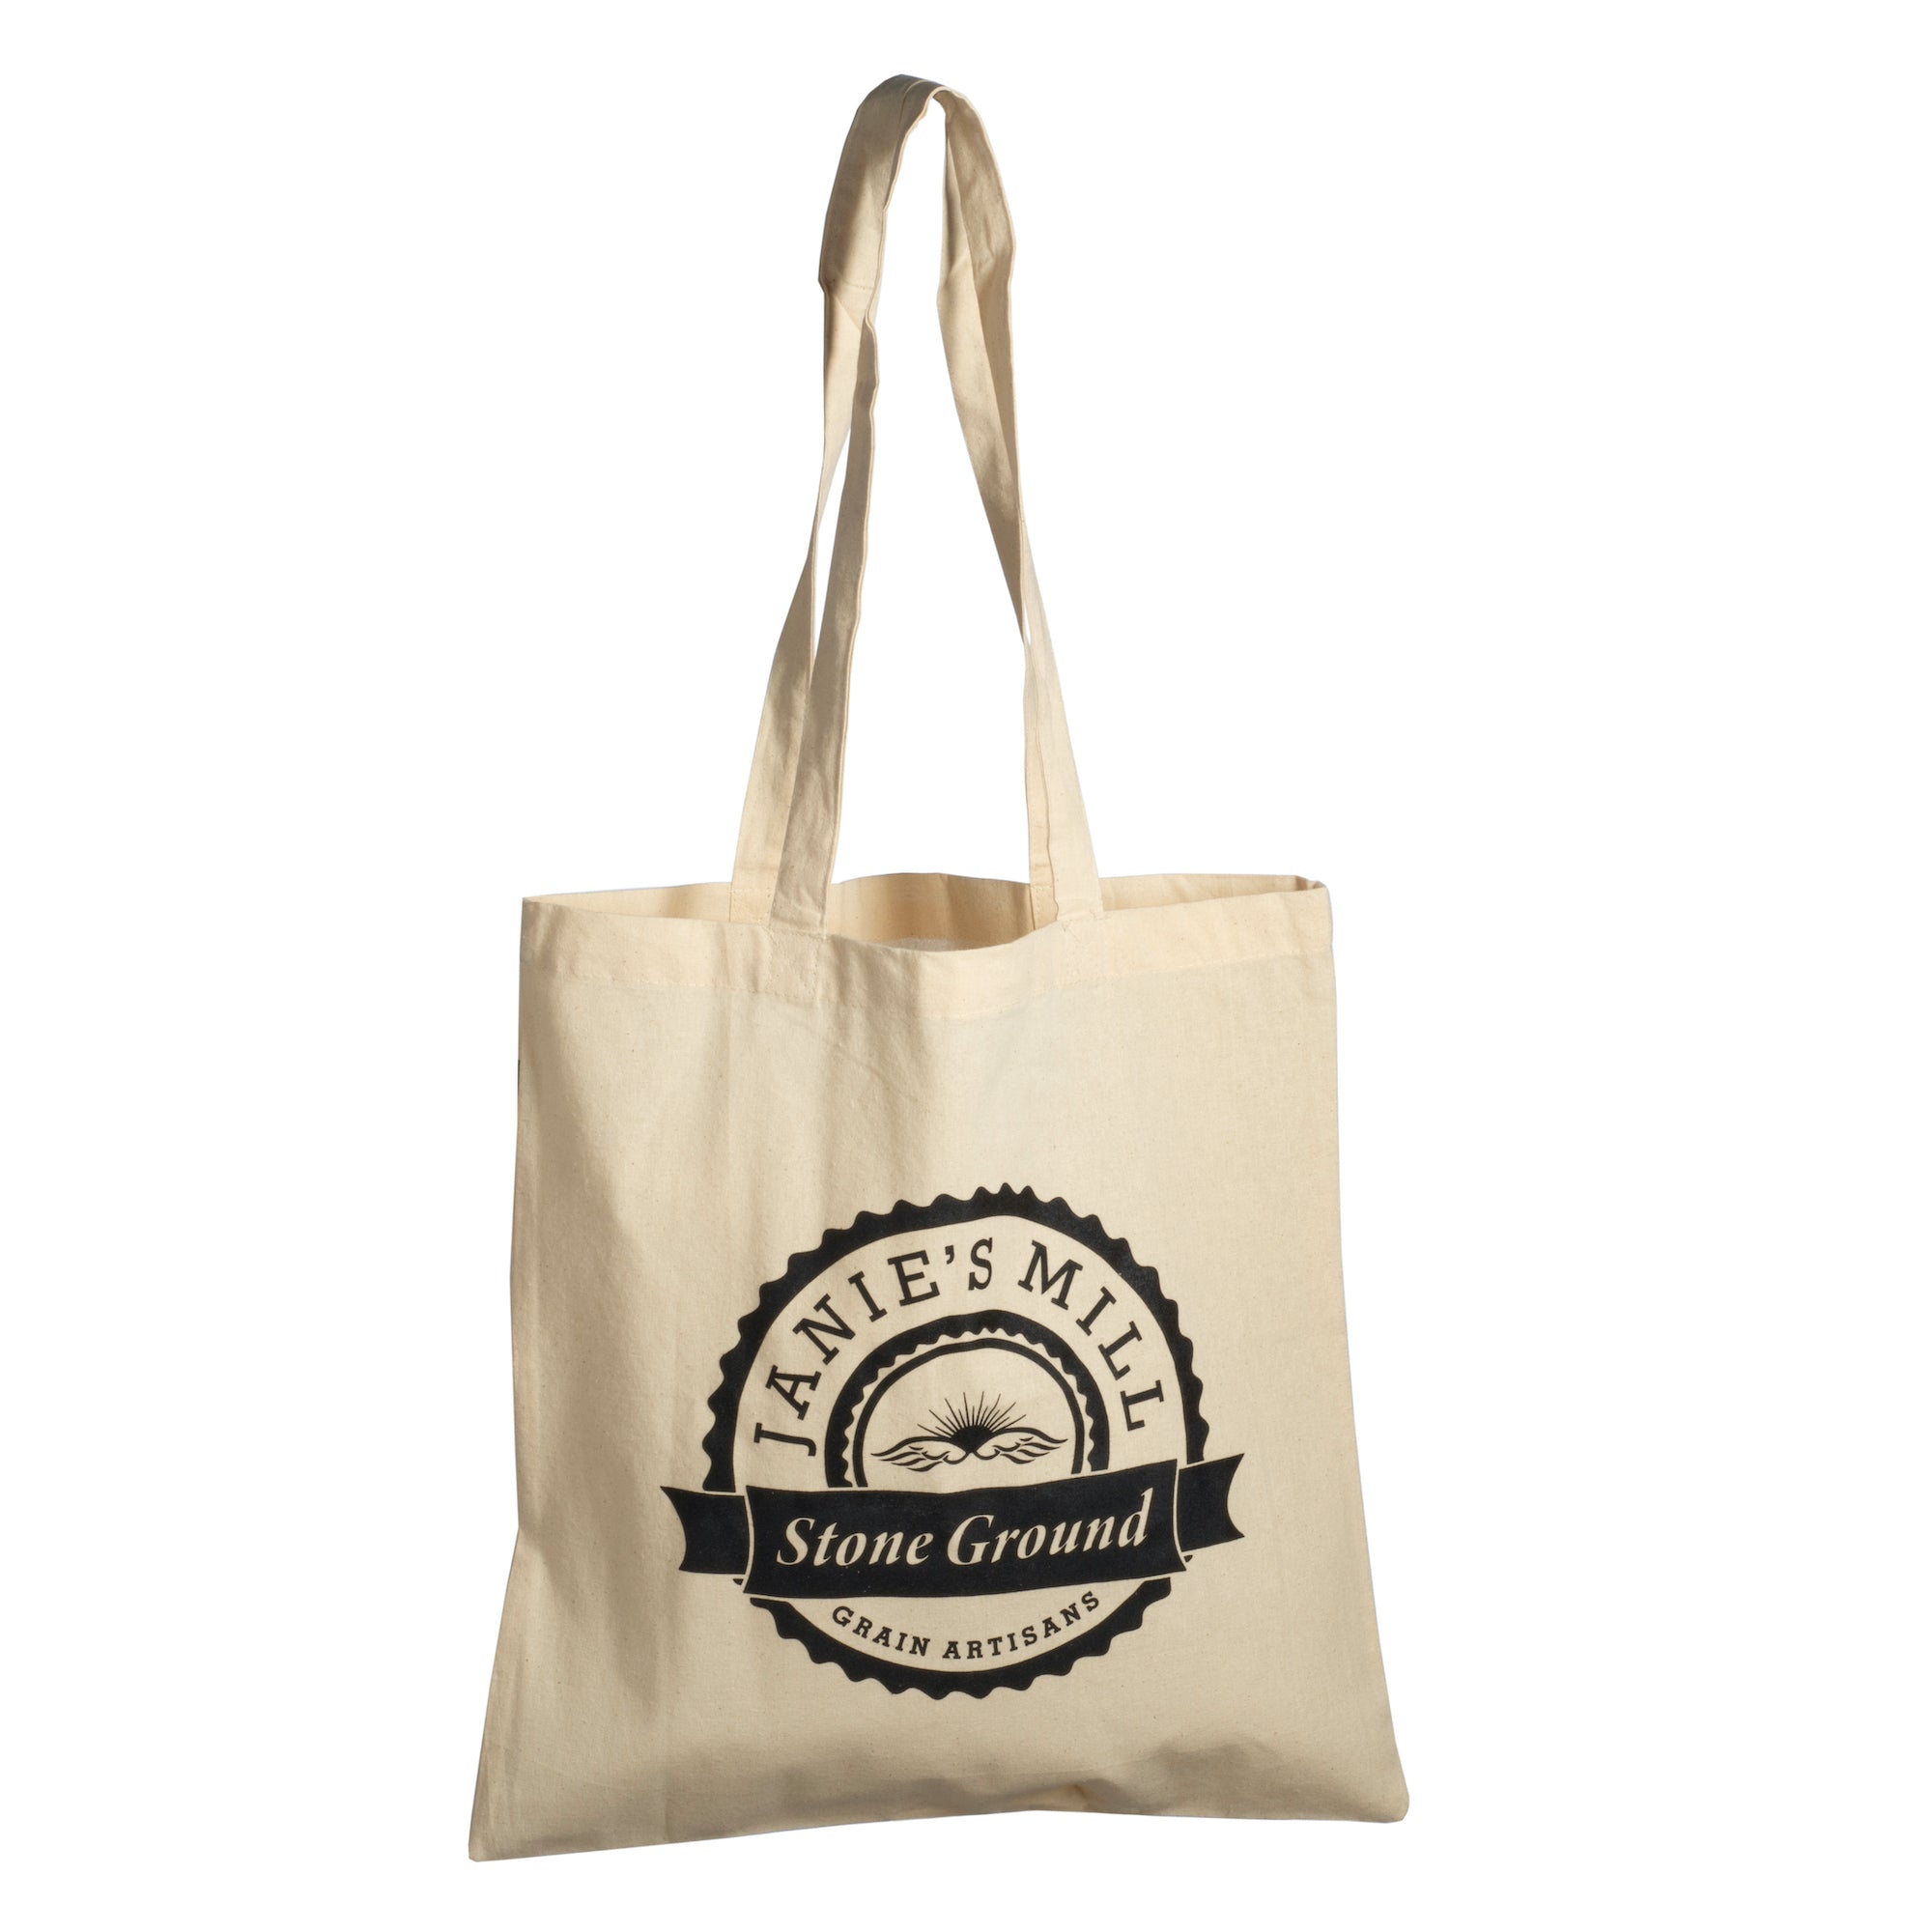 100% organic cotton durable grocery tote bags canvas